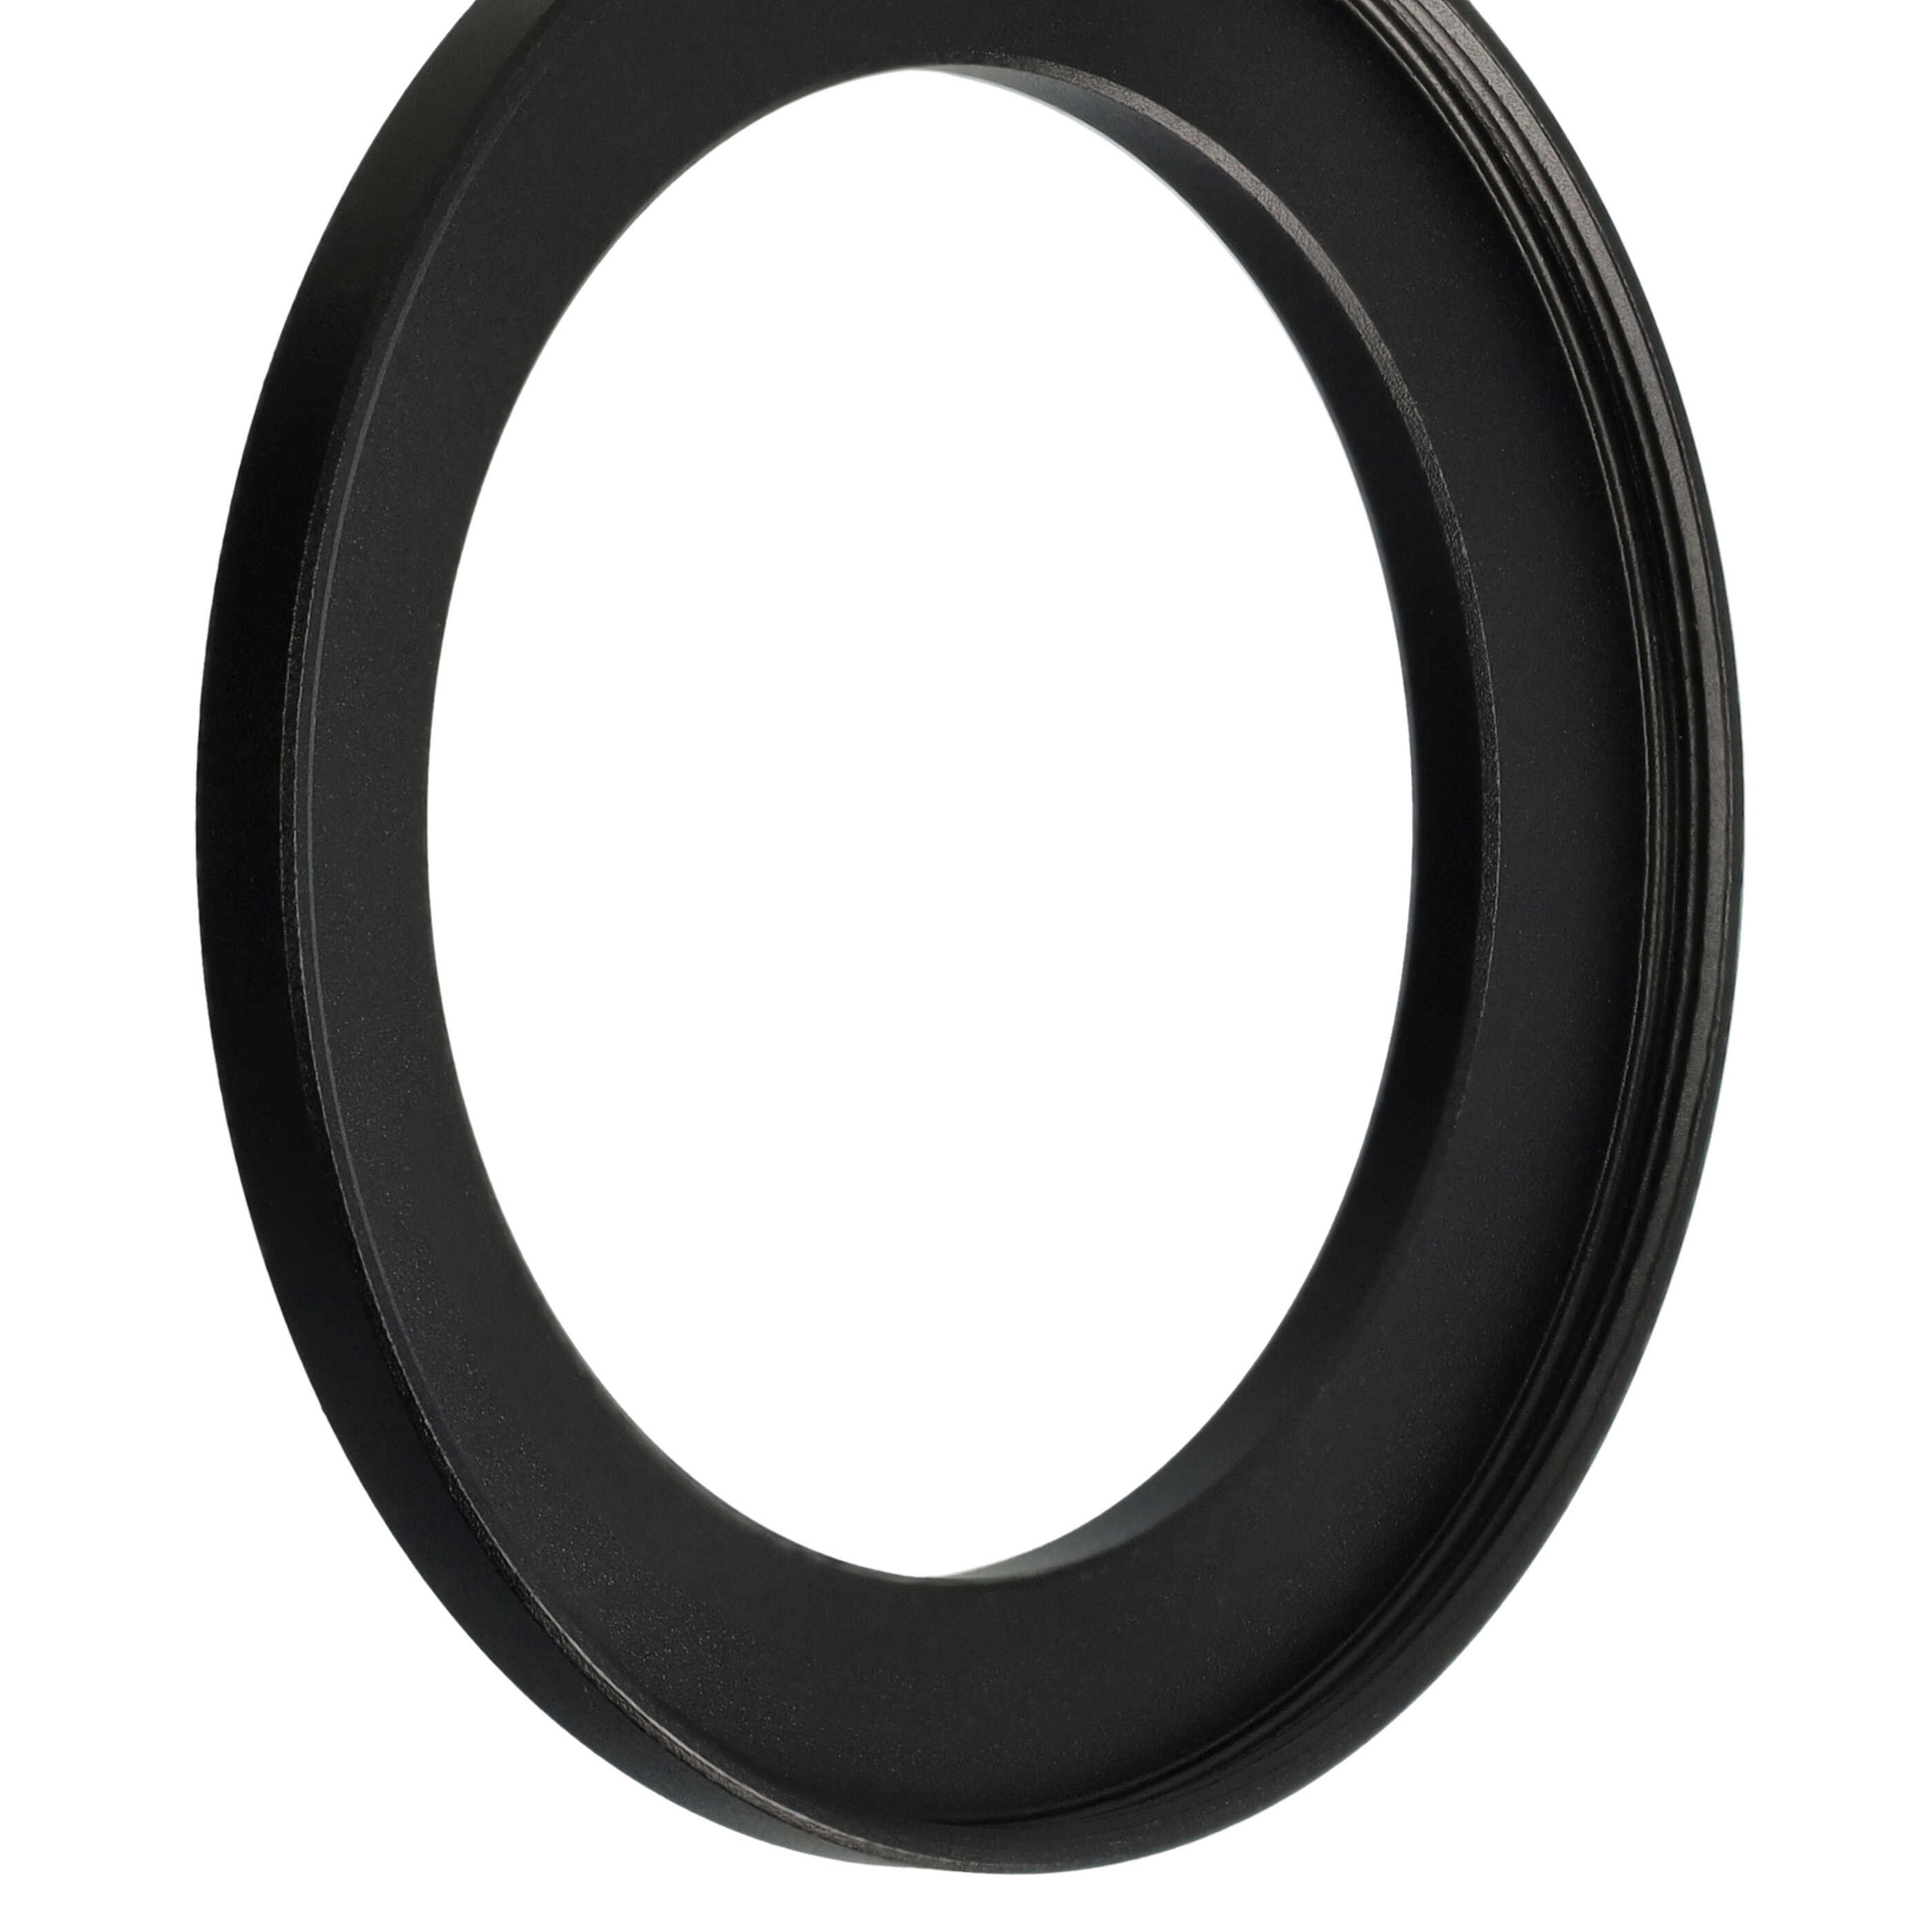 Step-Up Ring Adapter of 46 mm to 58 mmfor various Camera Lens - Filter Adapter